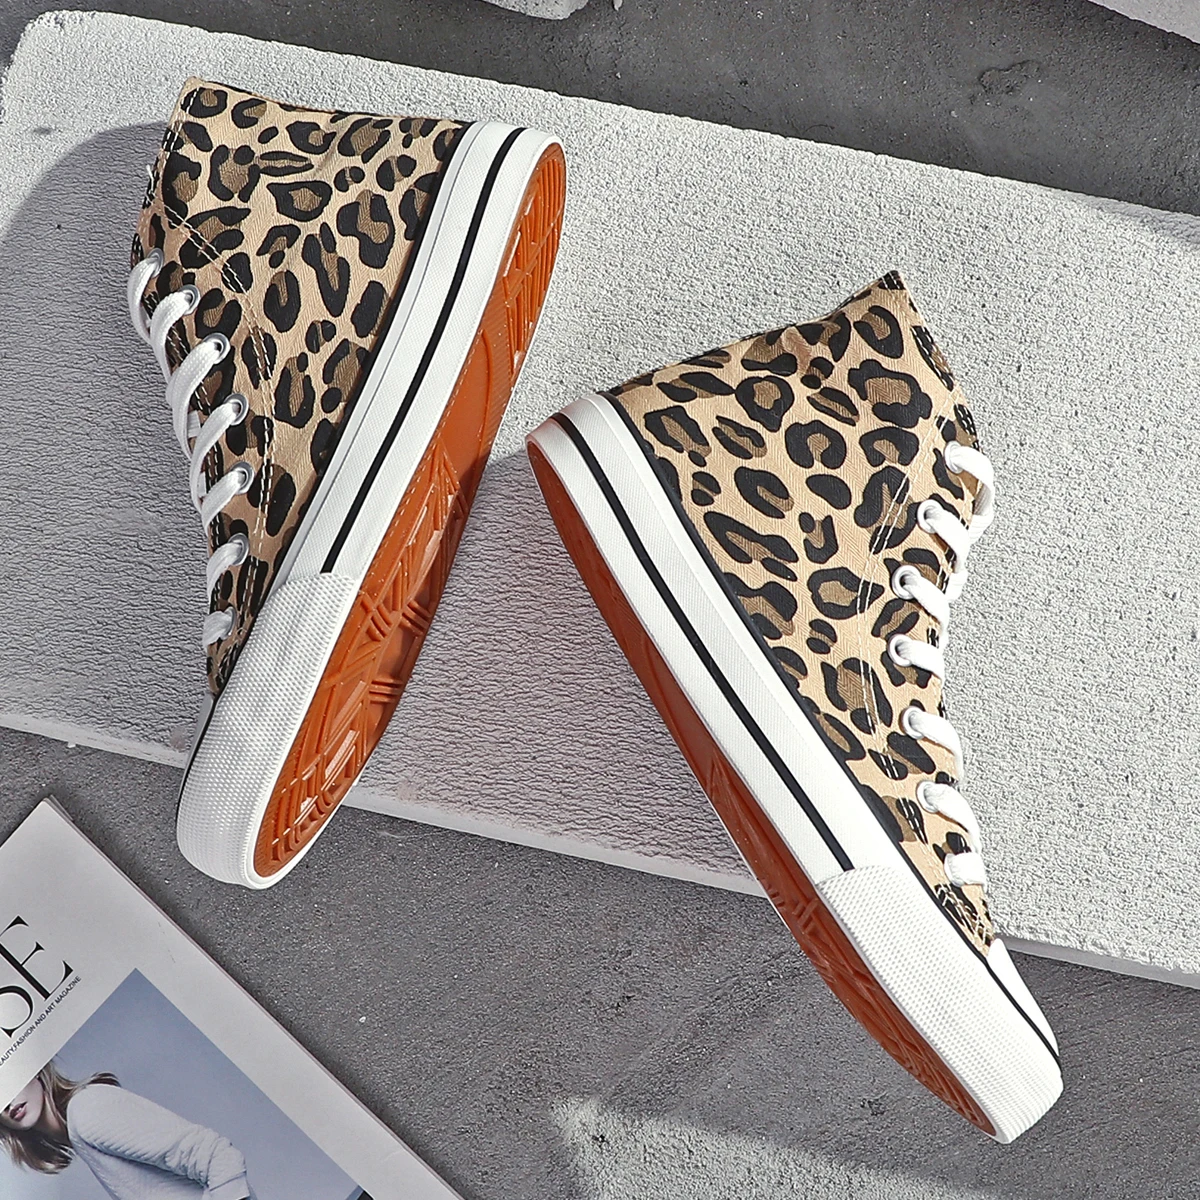 Fashion canvas trend shoes women's vulcanized shoes printed leopard print canvas shoes can be customized